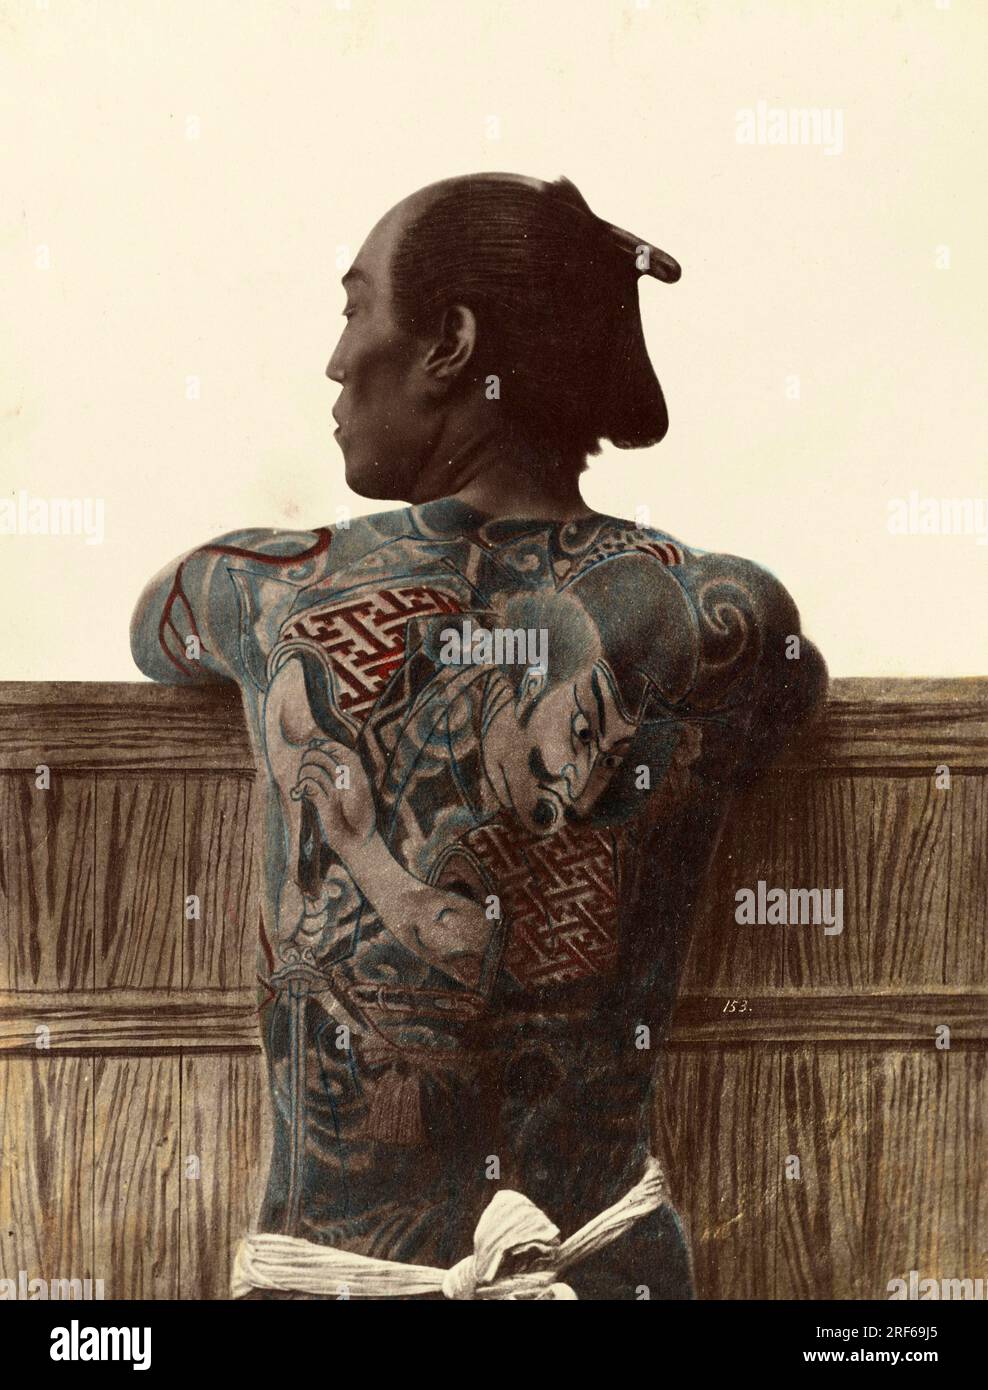 Alamy stock - and hi-res tattoo Japanese back images photography